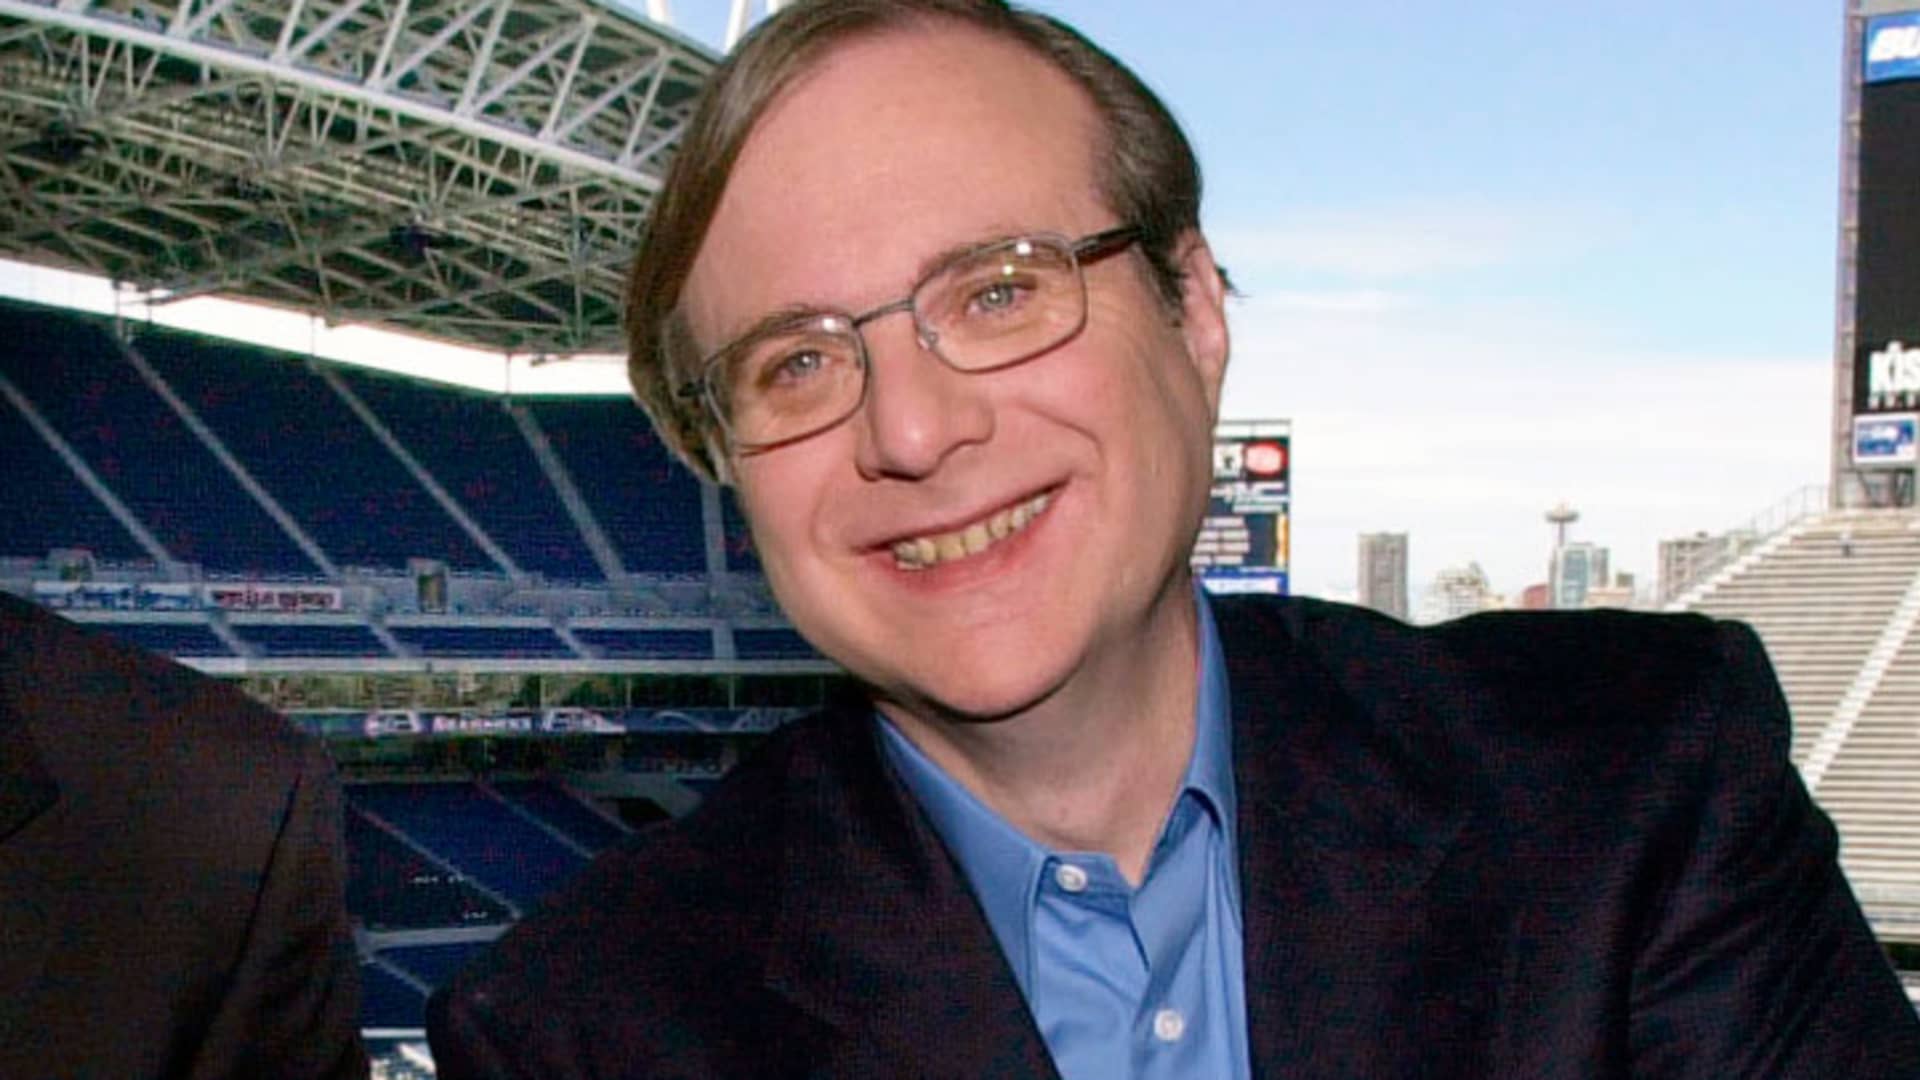 Microsoft co-founder Paul Allen dies of cancer at age 65